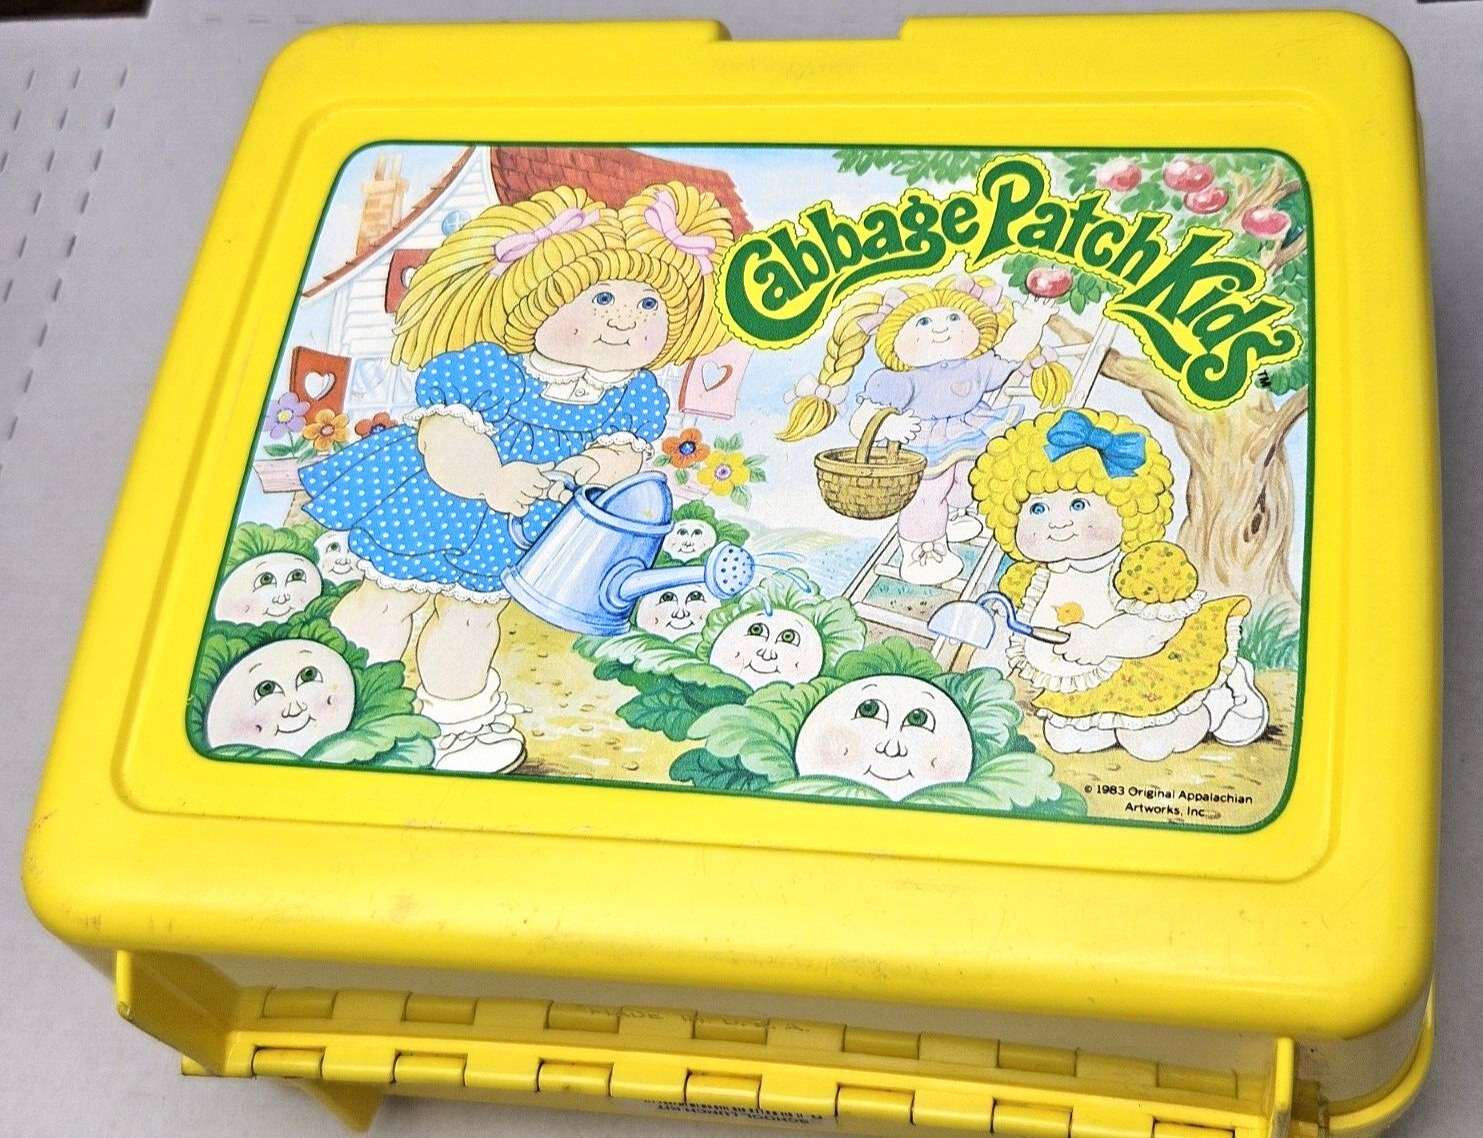 Vintage 1983 Cabbage Patch Kids Yellow Lunchbox w Thermos - EXCELLENT condition